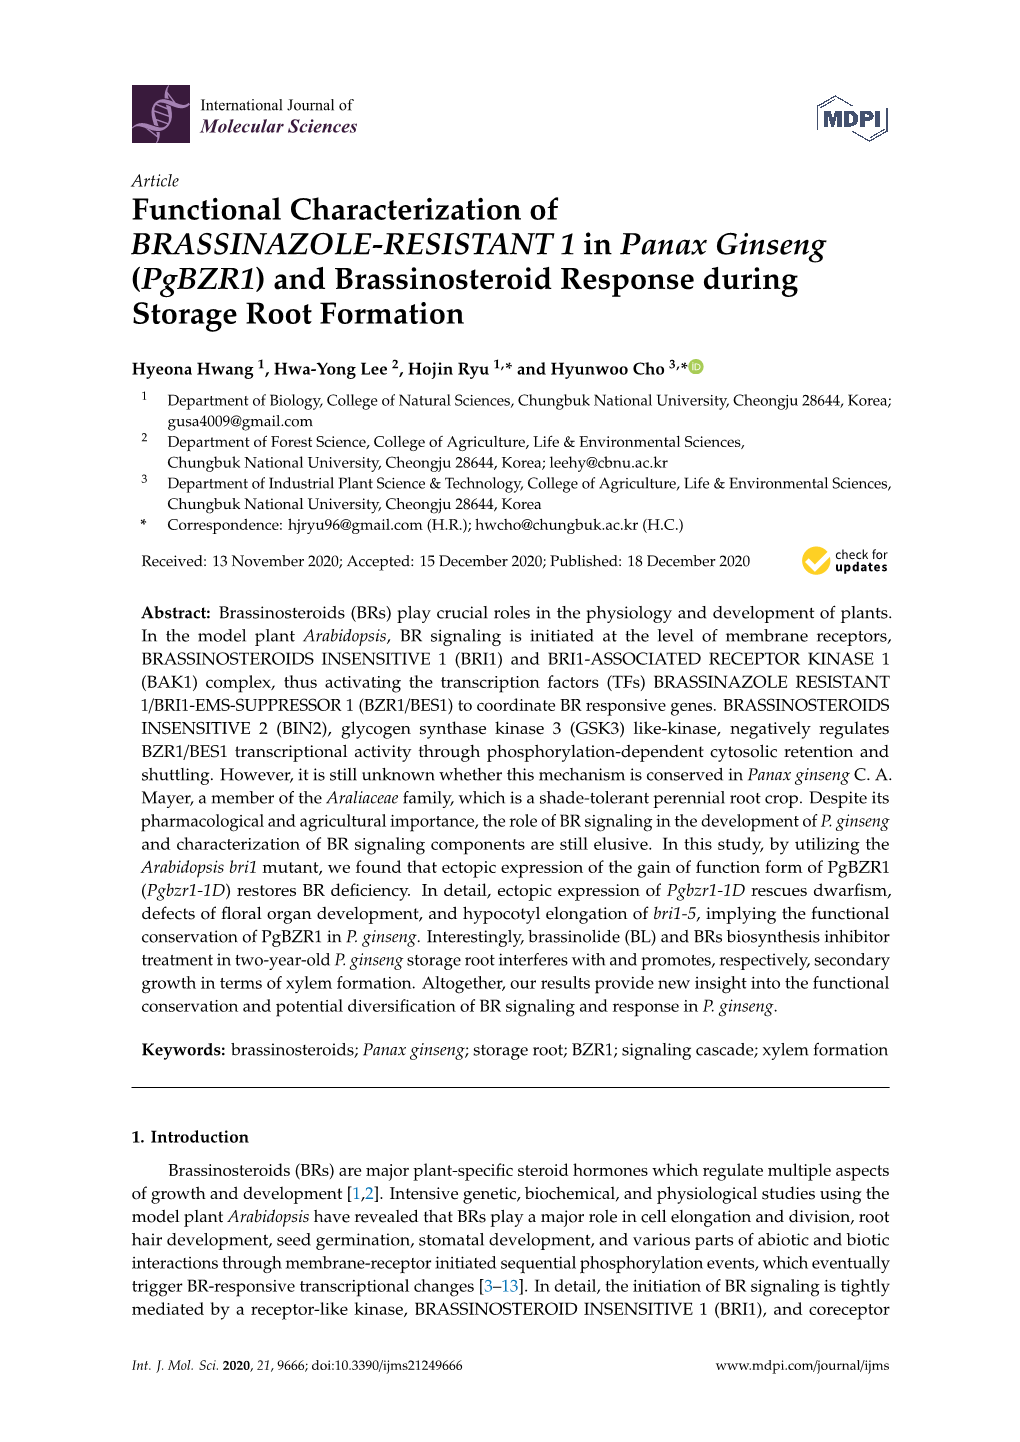 Functional Characterization of BRASSINAZOLE-RESISTANT 1 in Panax Ginseng (Pgbzr1) and Brassinosteroid Response During Storage Root Formation